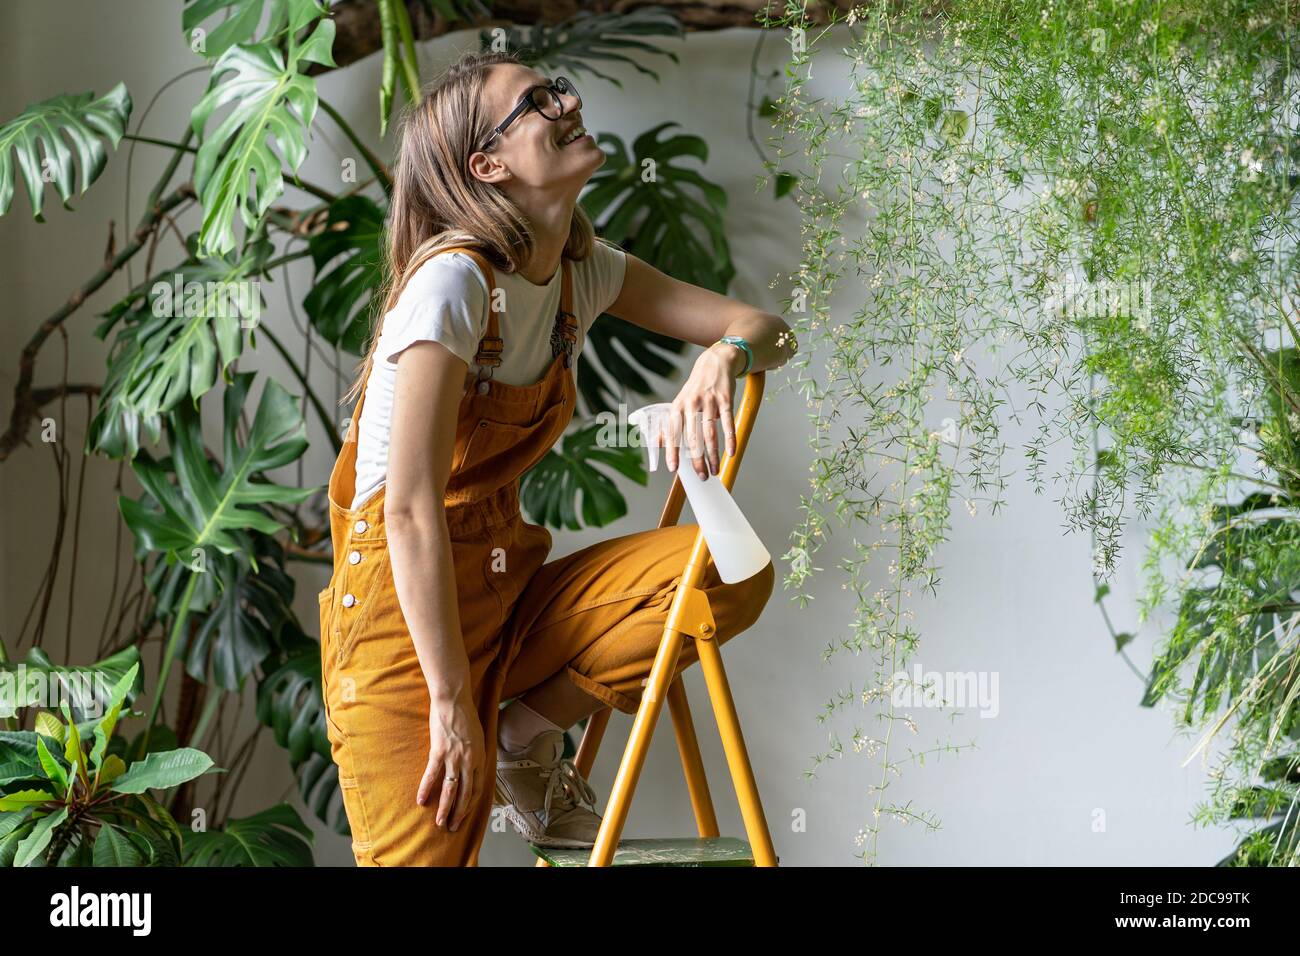 Happy gardener woman holding pulverizer spray, smiling, takes a break from work, sitting on stepladder, wearing glasses and orange overalls. Greenery Stock Photo